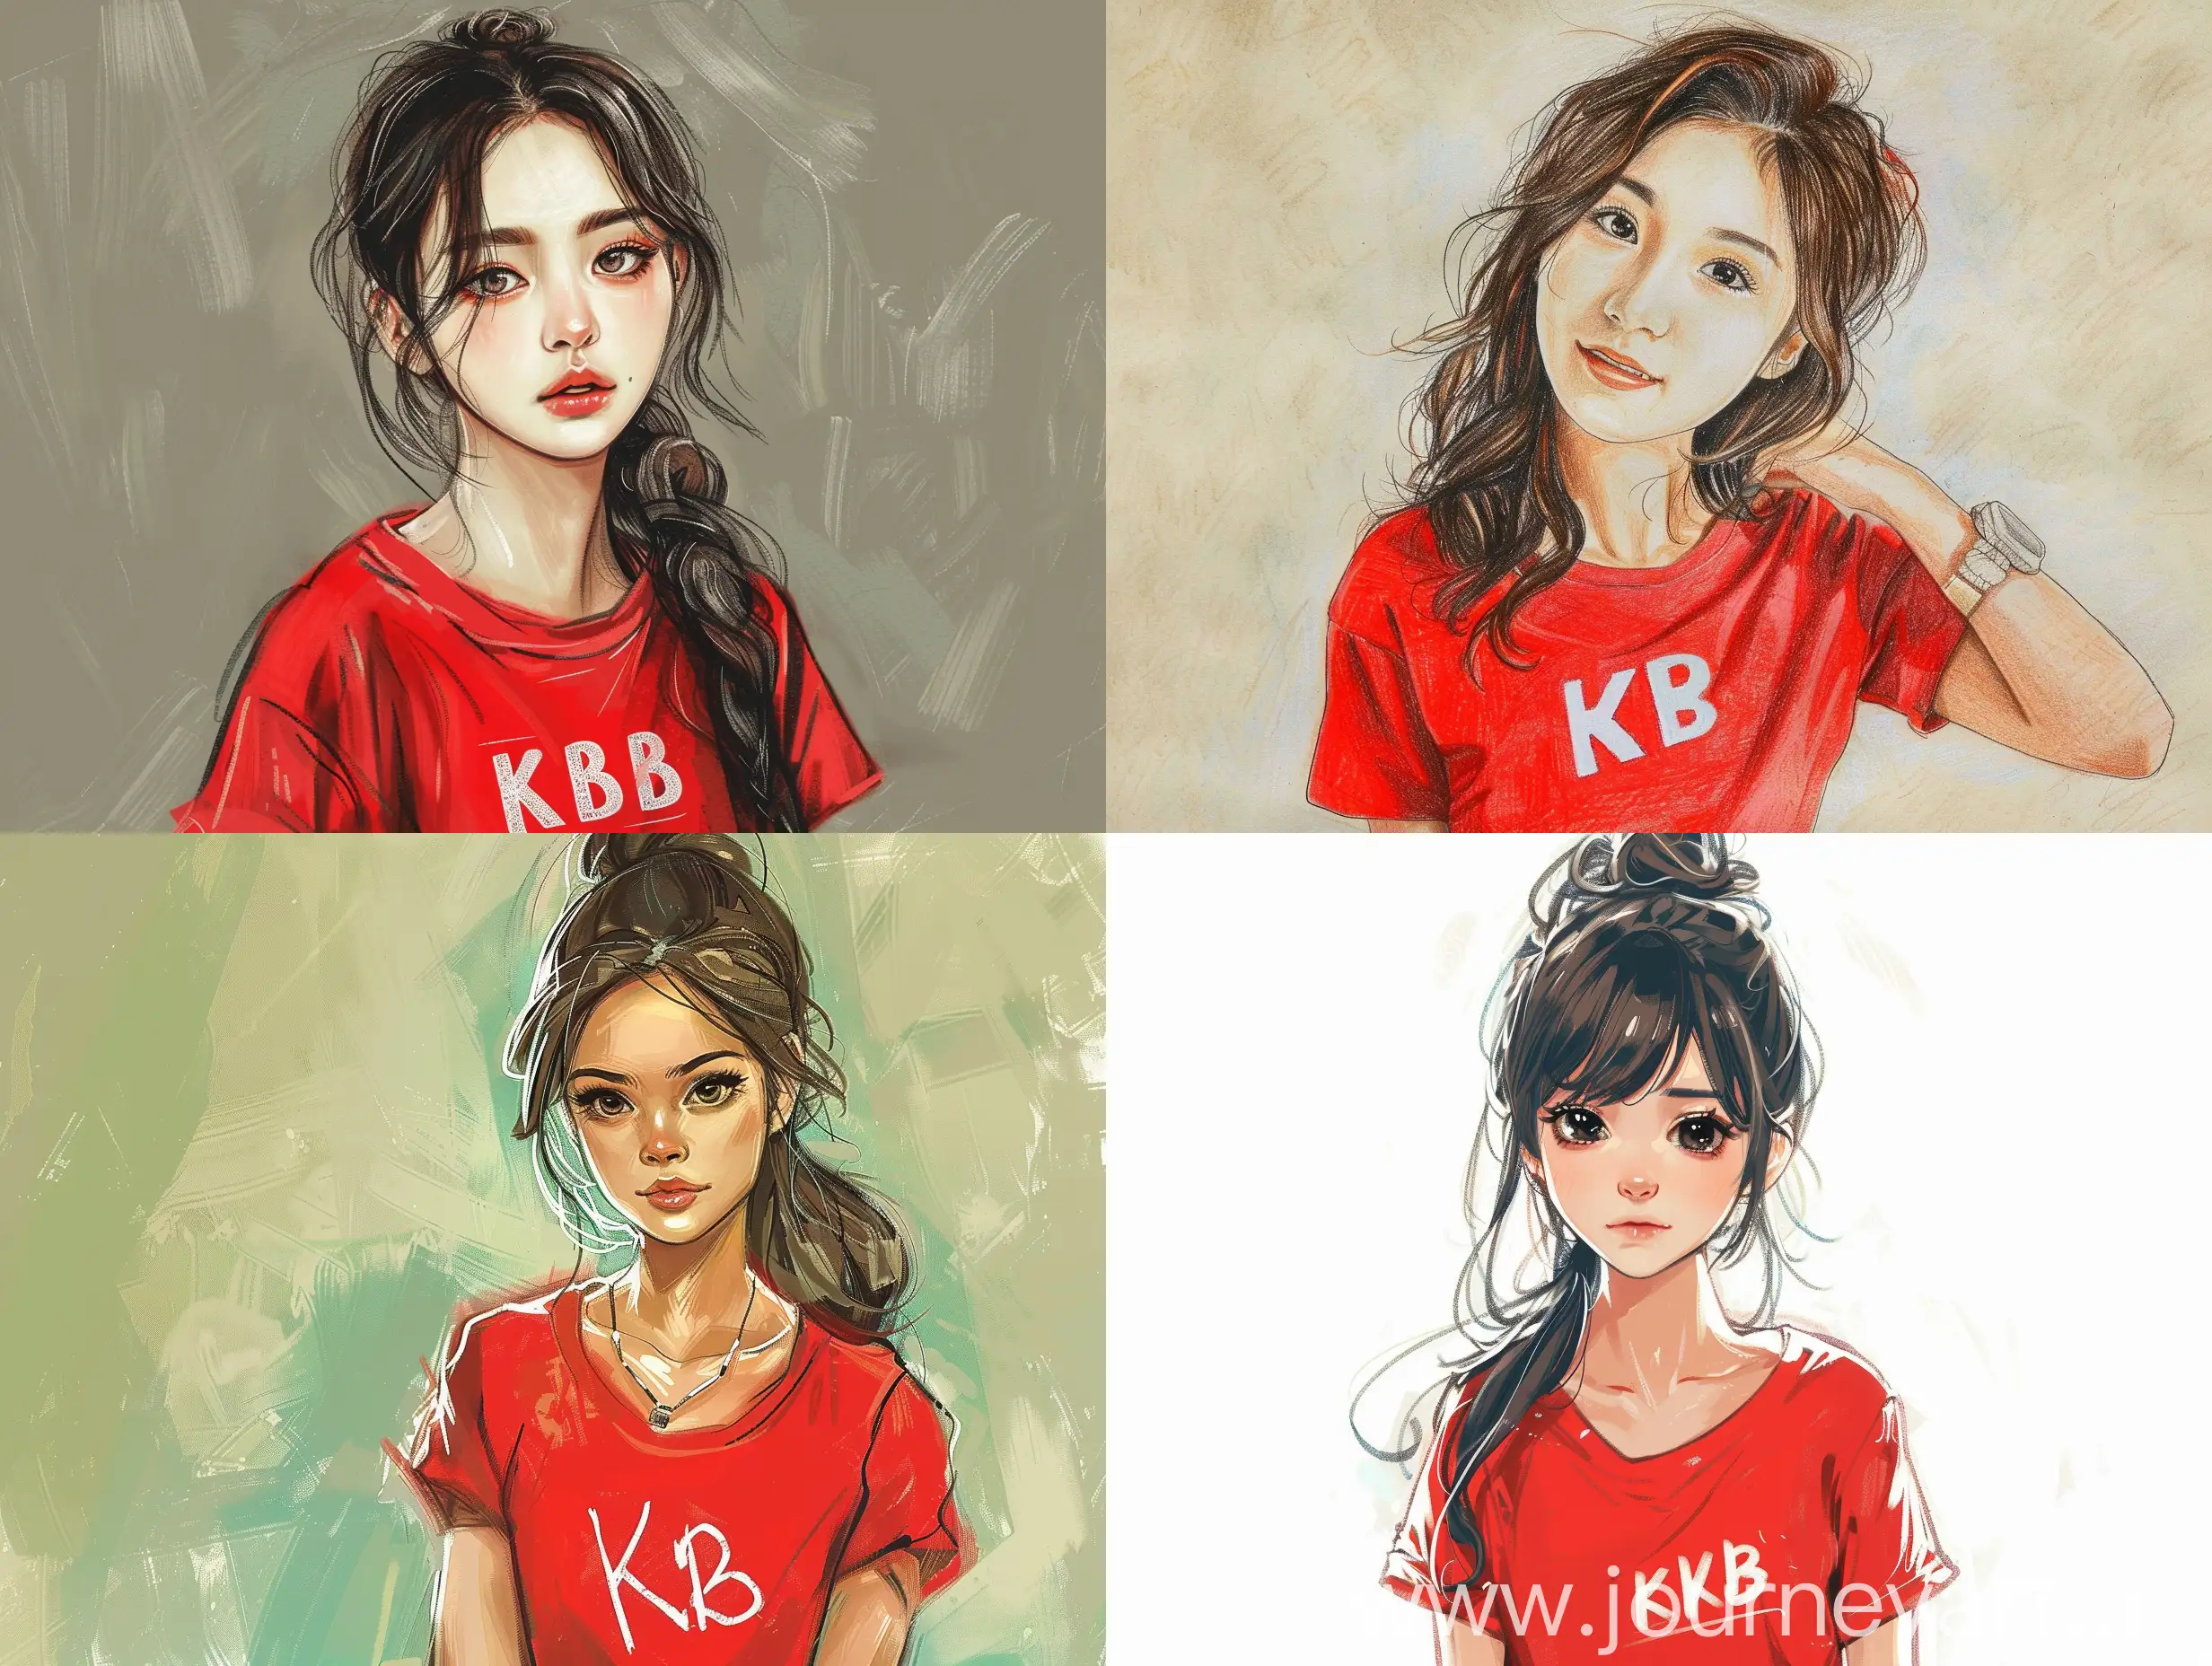 Draw a picture of a beautiful girl wearing red t-shirt written Kb